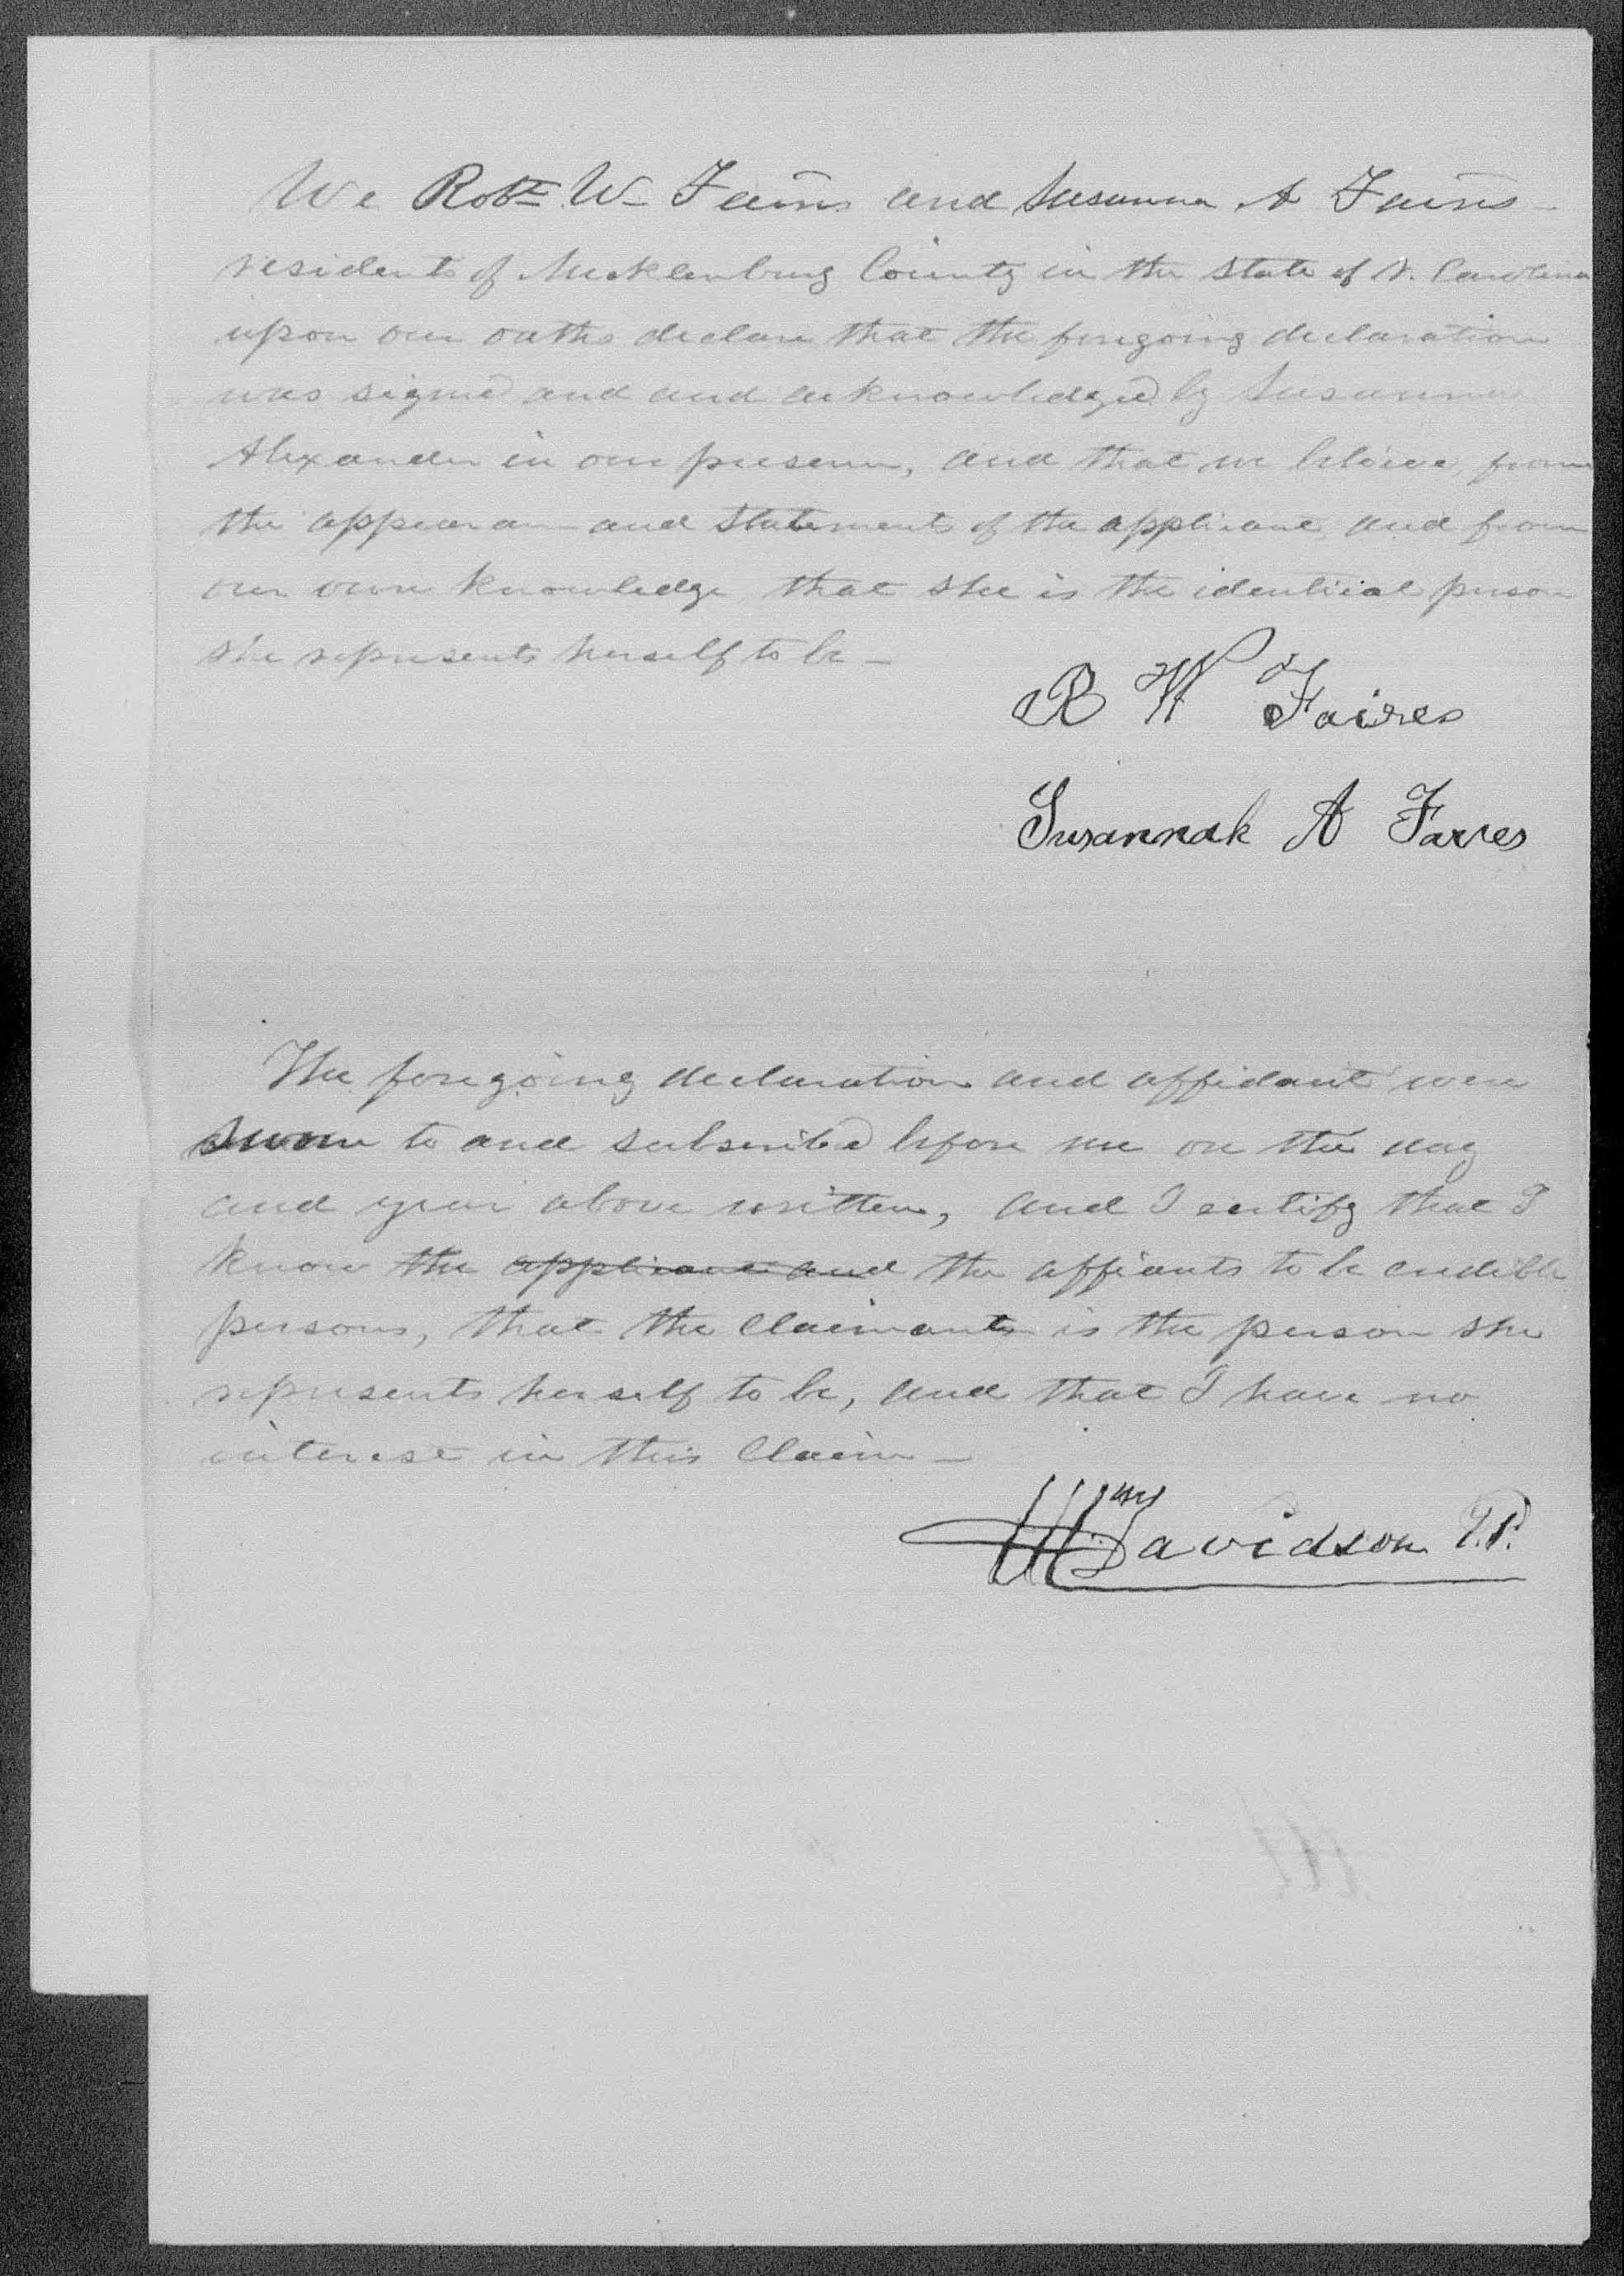 Appointment of William Davidson as Susana Alexander's Power of Attorney, 3 April 1855, page 2